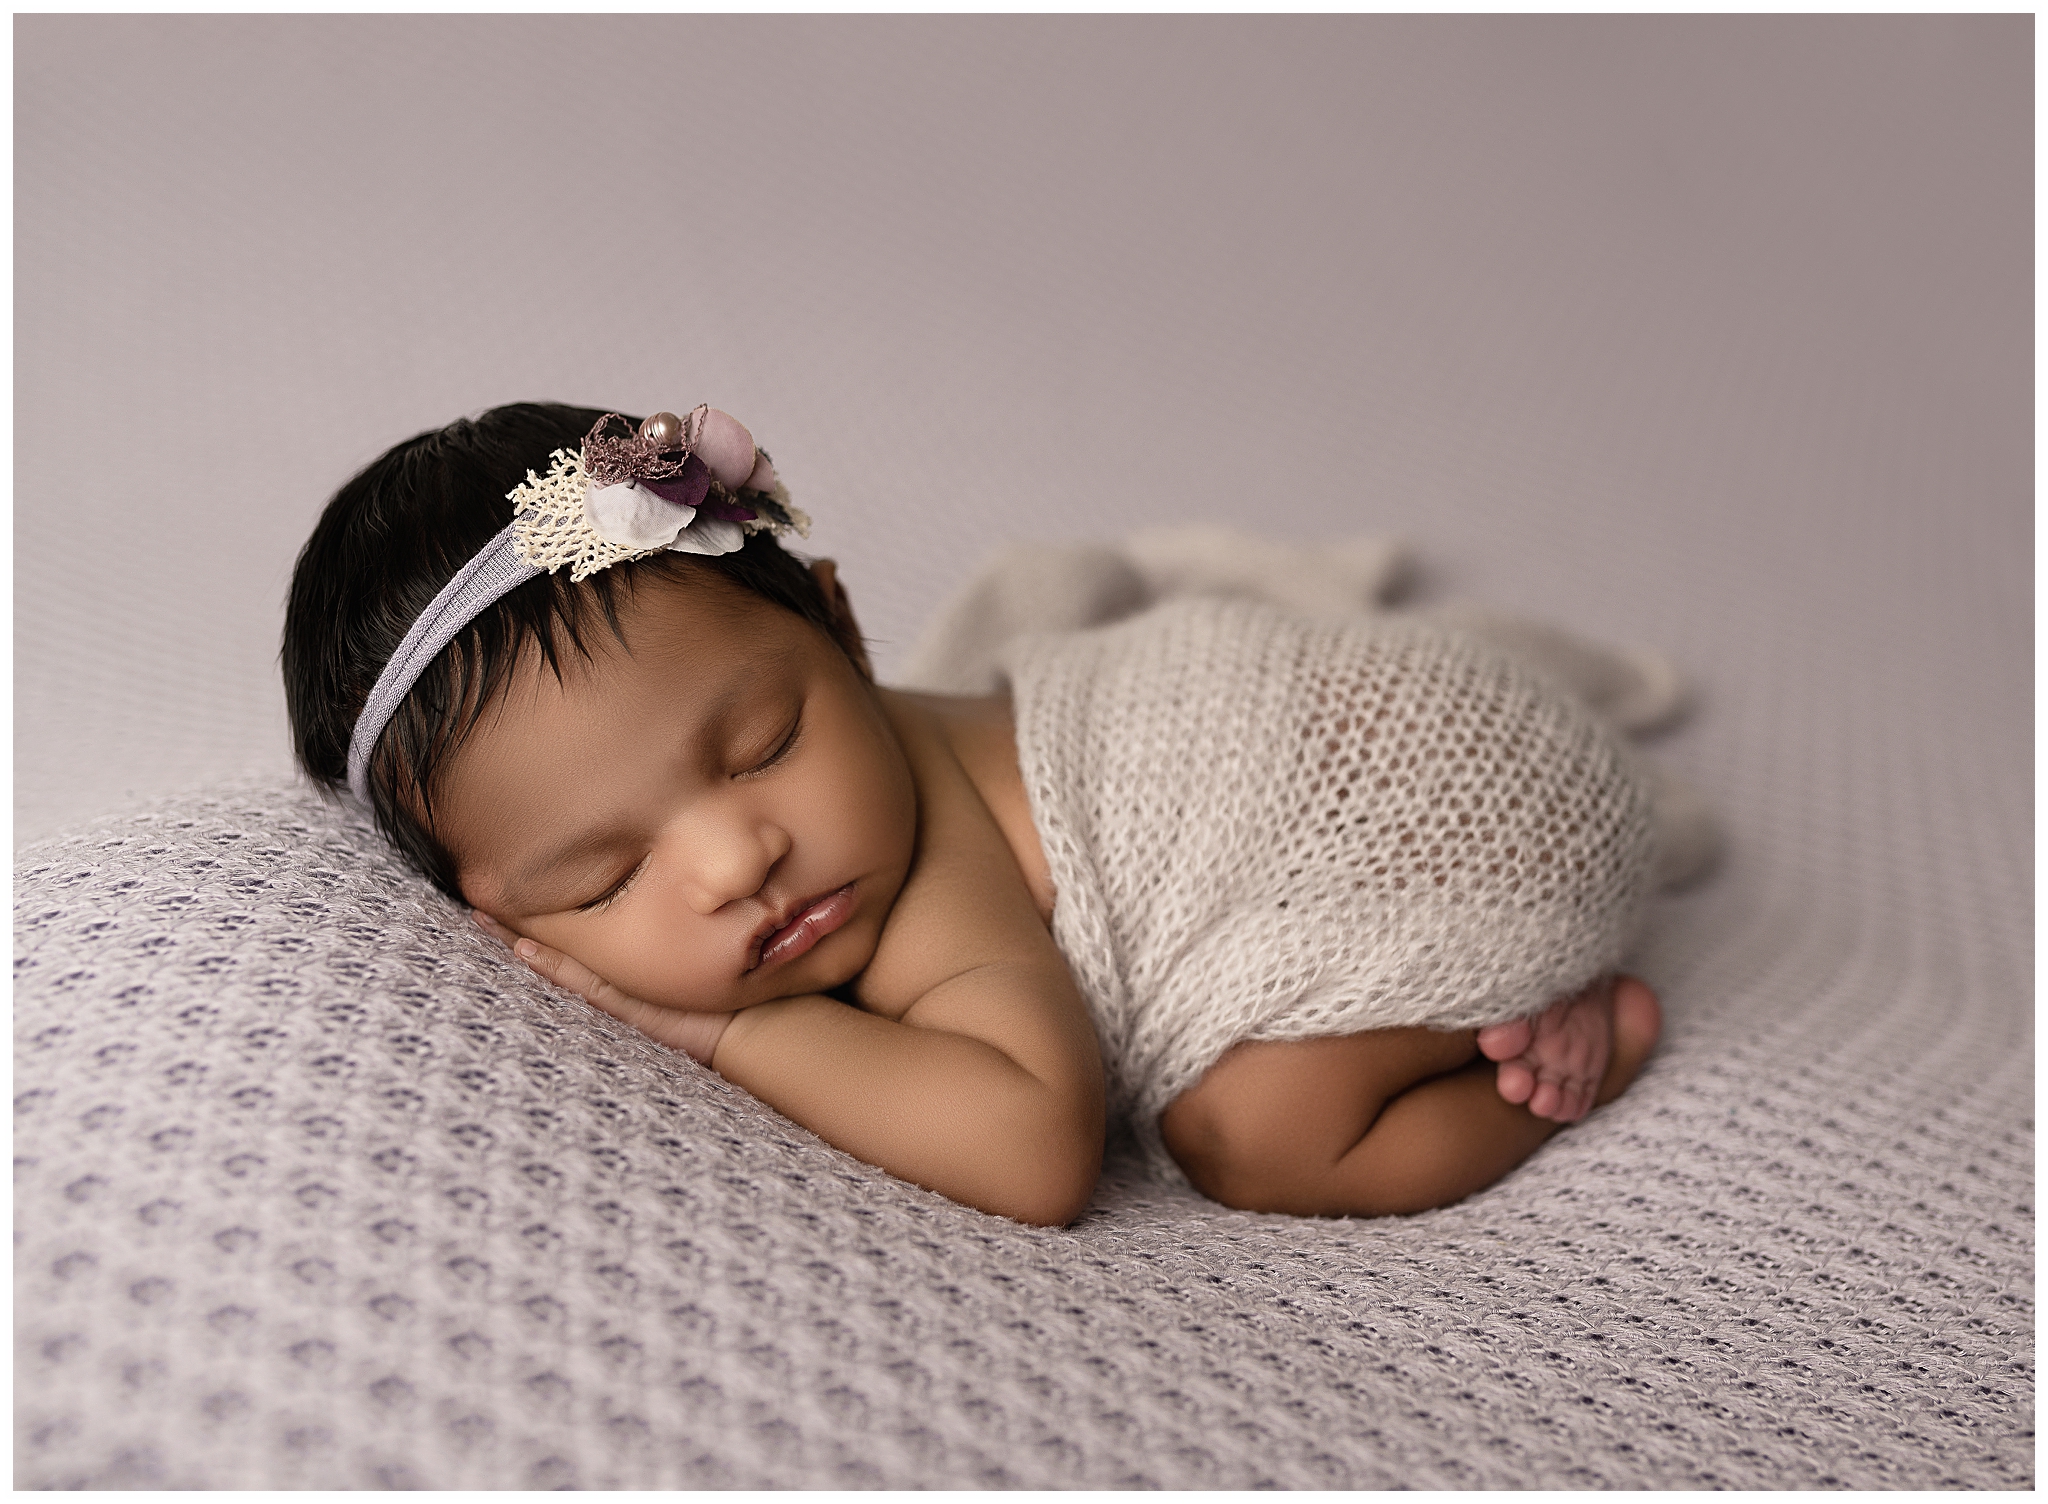 Sleeping baby on her belly laying on a purple blanket wrapped in a purple knit fabric and wearing a purple headband.